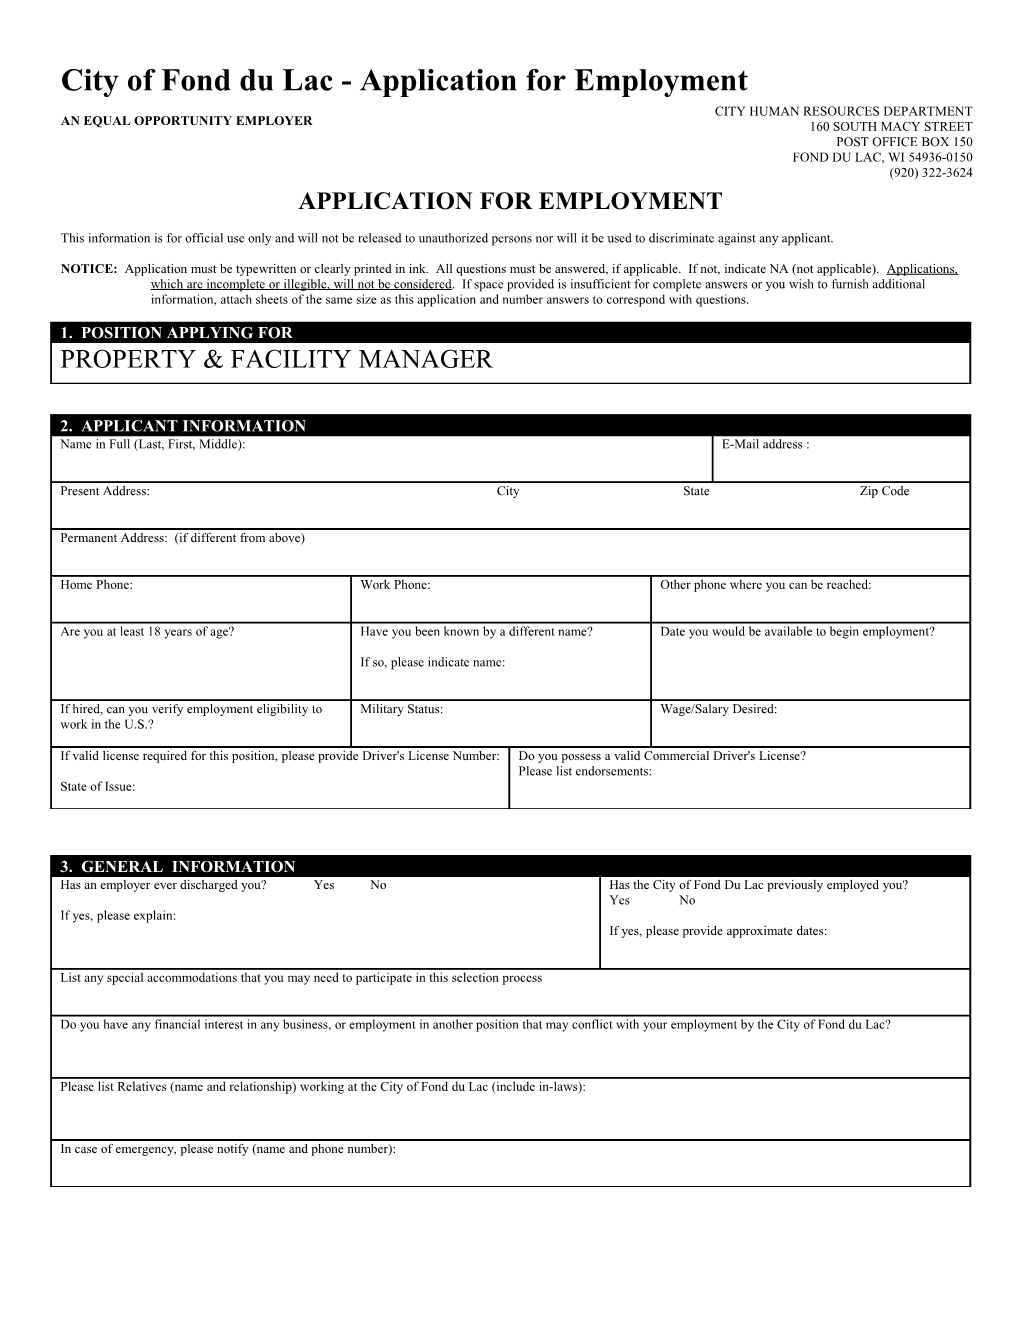 Application for Employment s171